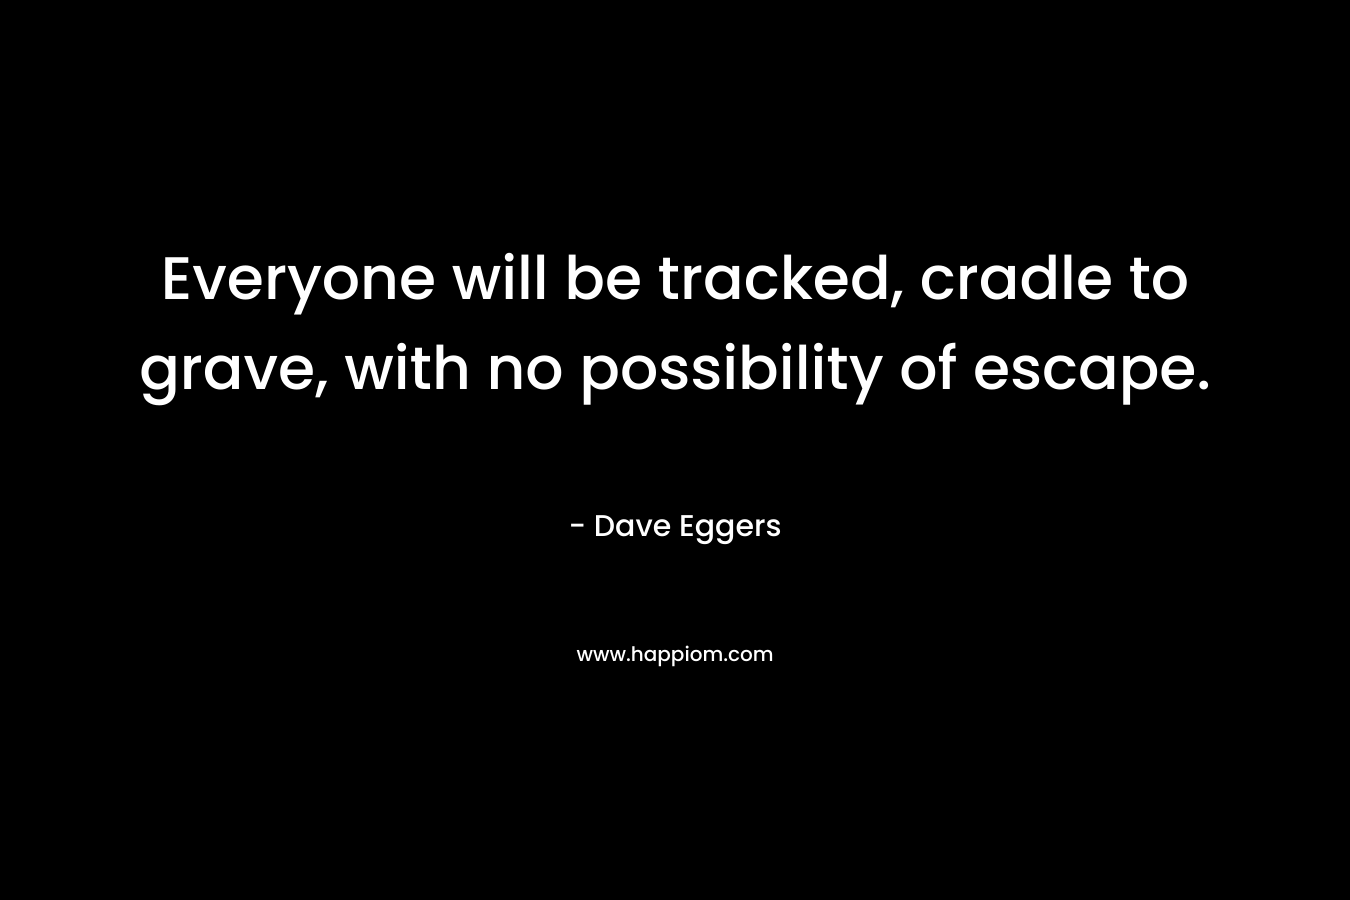 Everyone will be tracked, cradle to grave, with no possibility of escape.